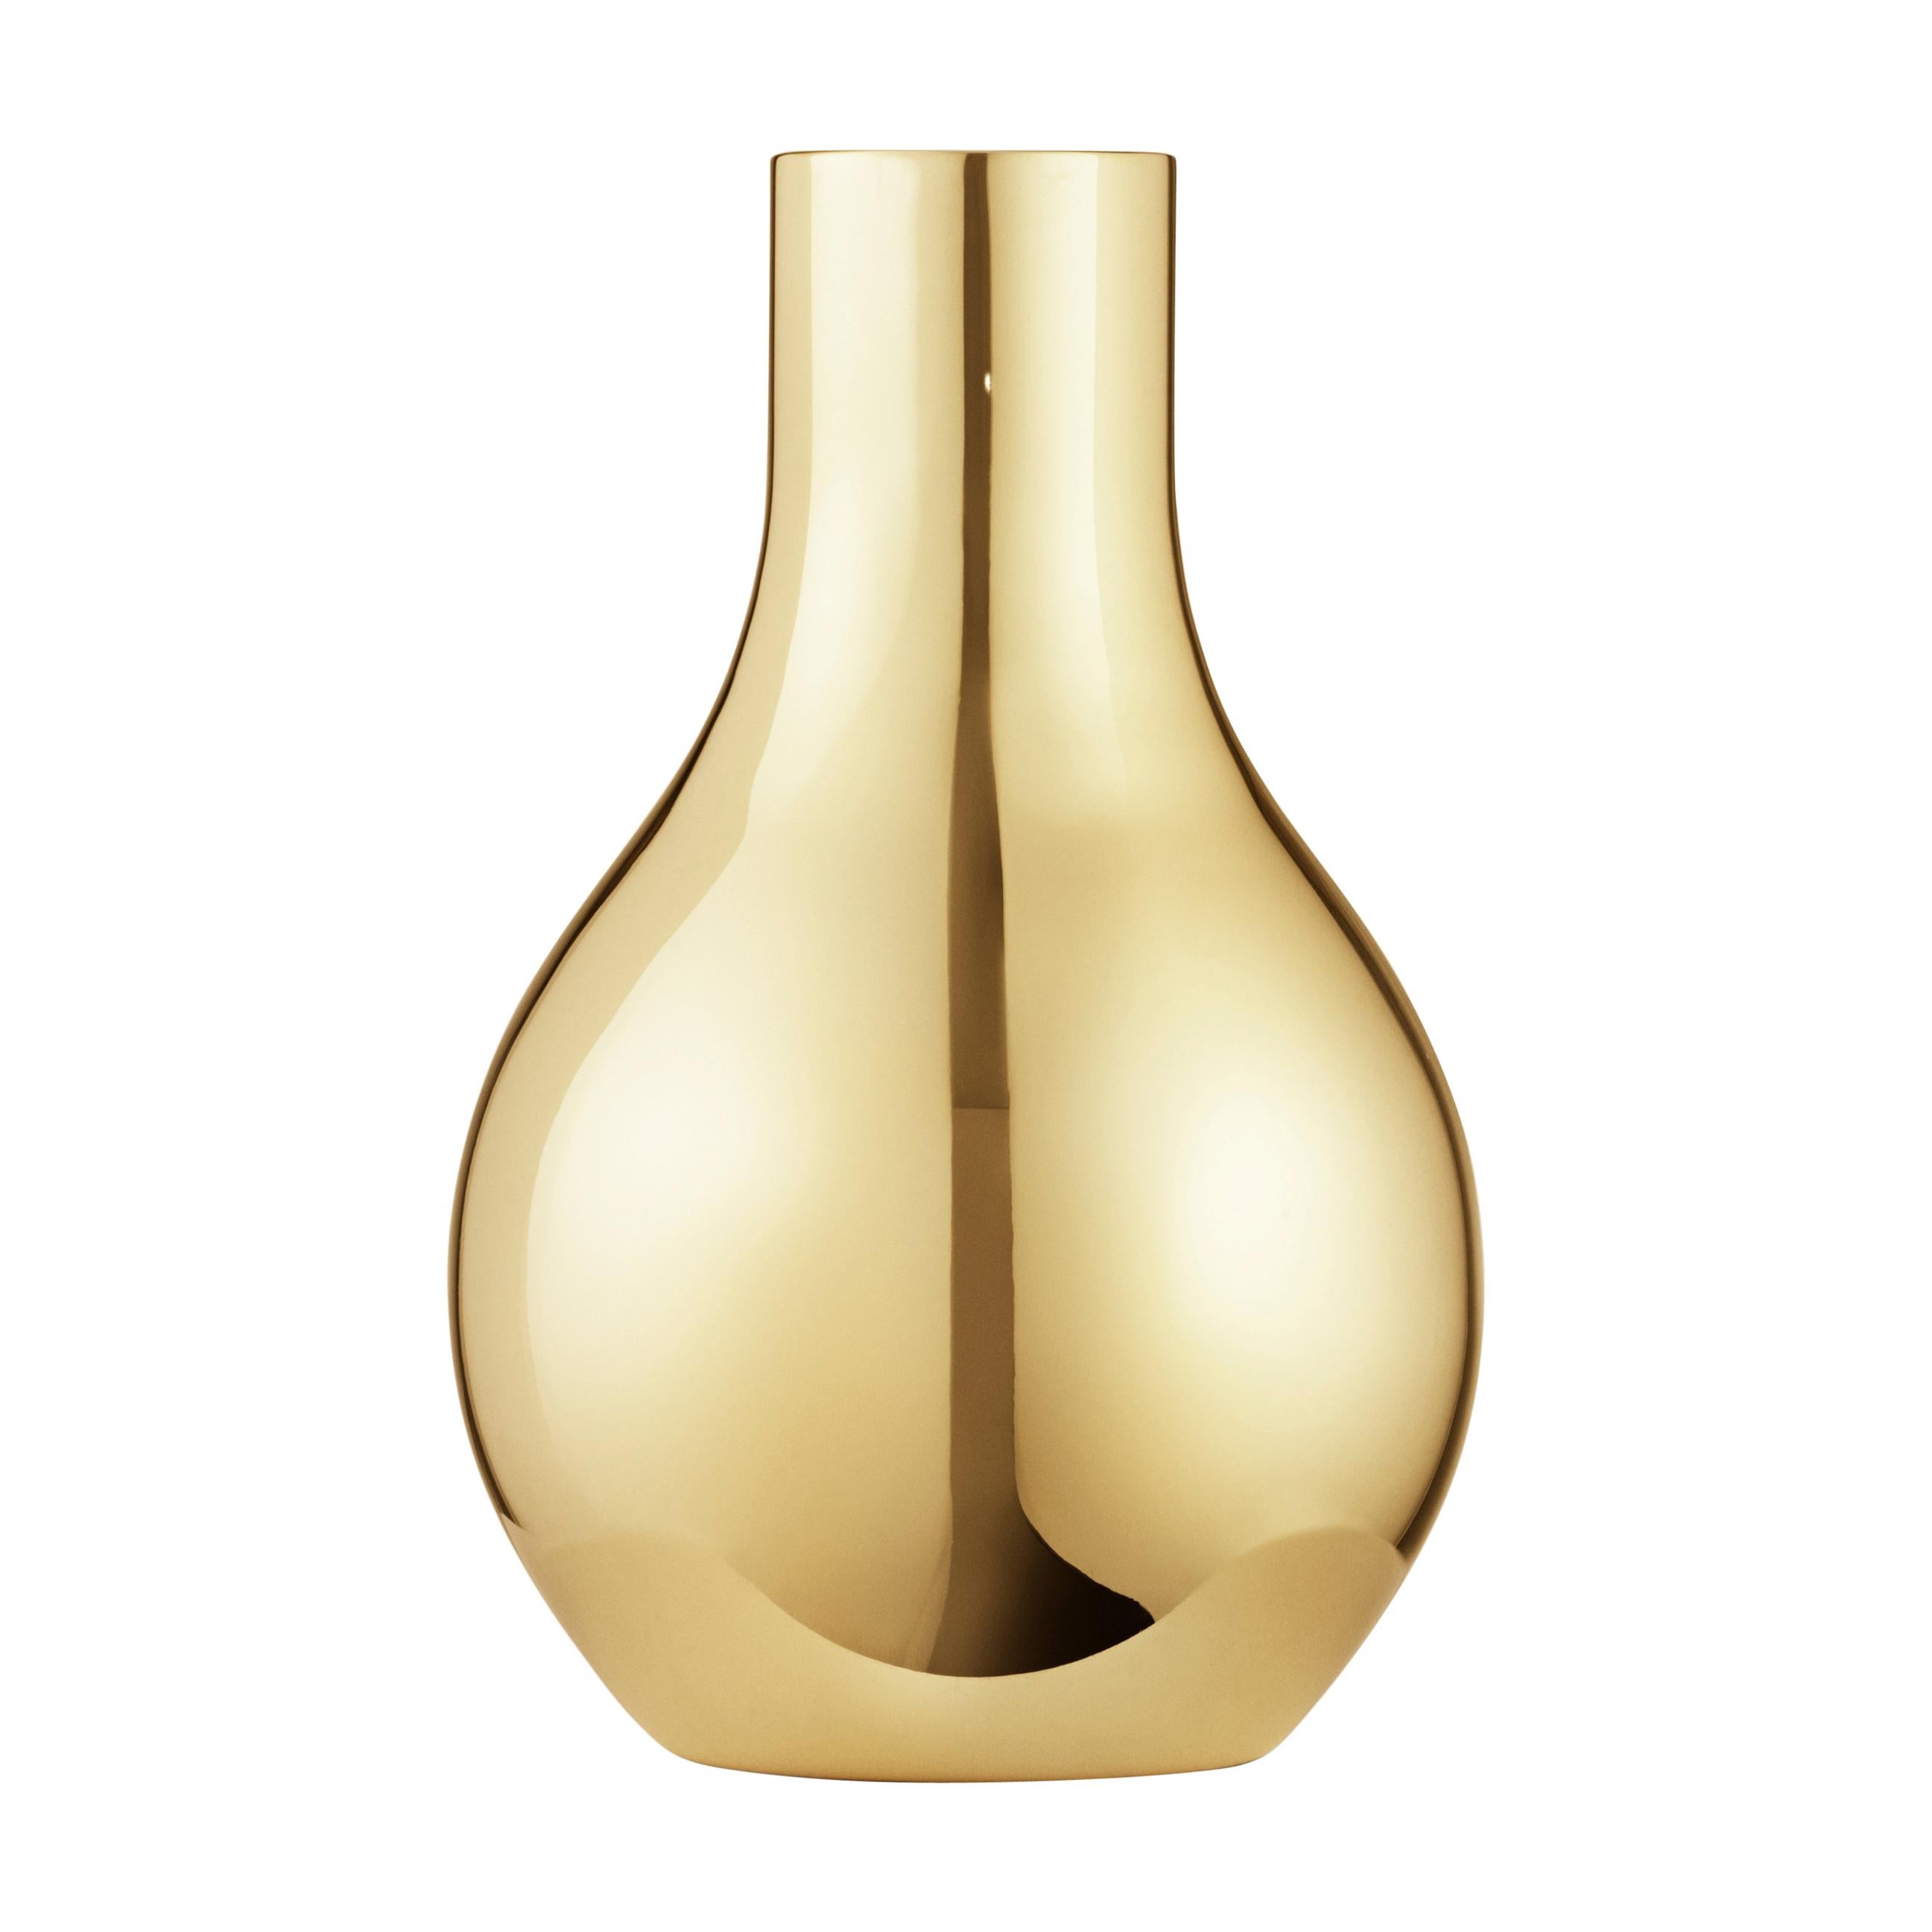 Georg Jensen Cafu Extra Small Vase in Gold Plated Steel by Holmbäck Nordentoft